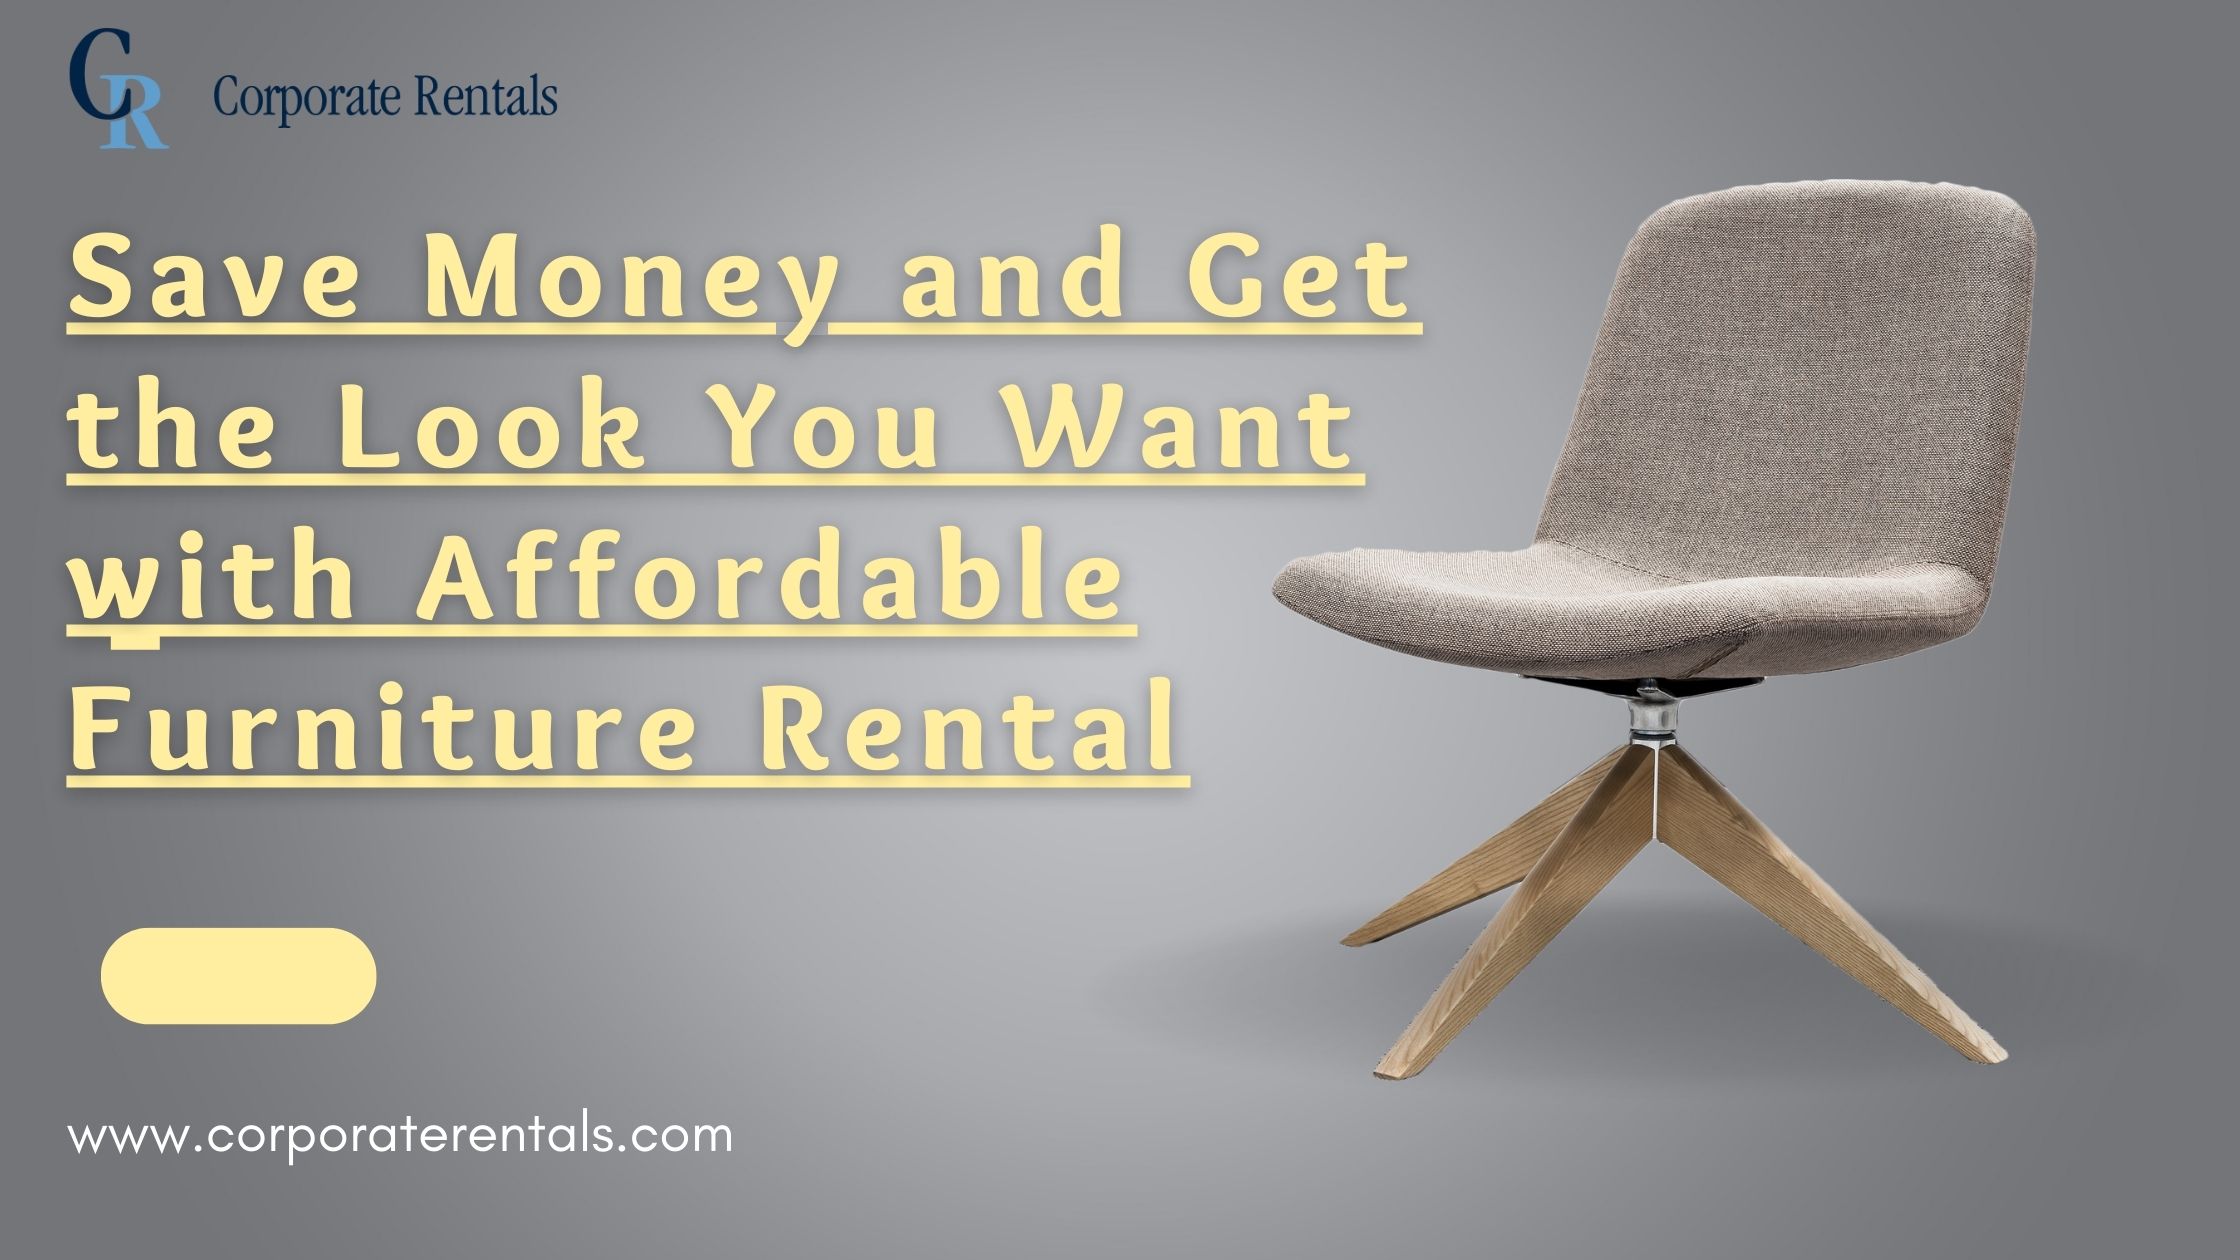 Save Money and Get the Look You Want with Affordable Furniture Rental